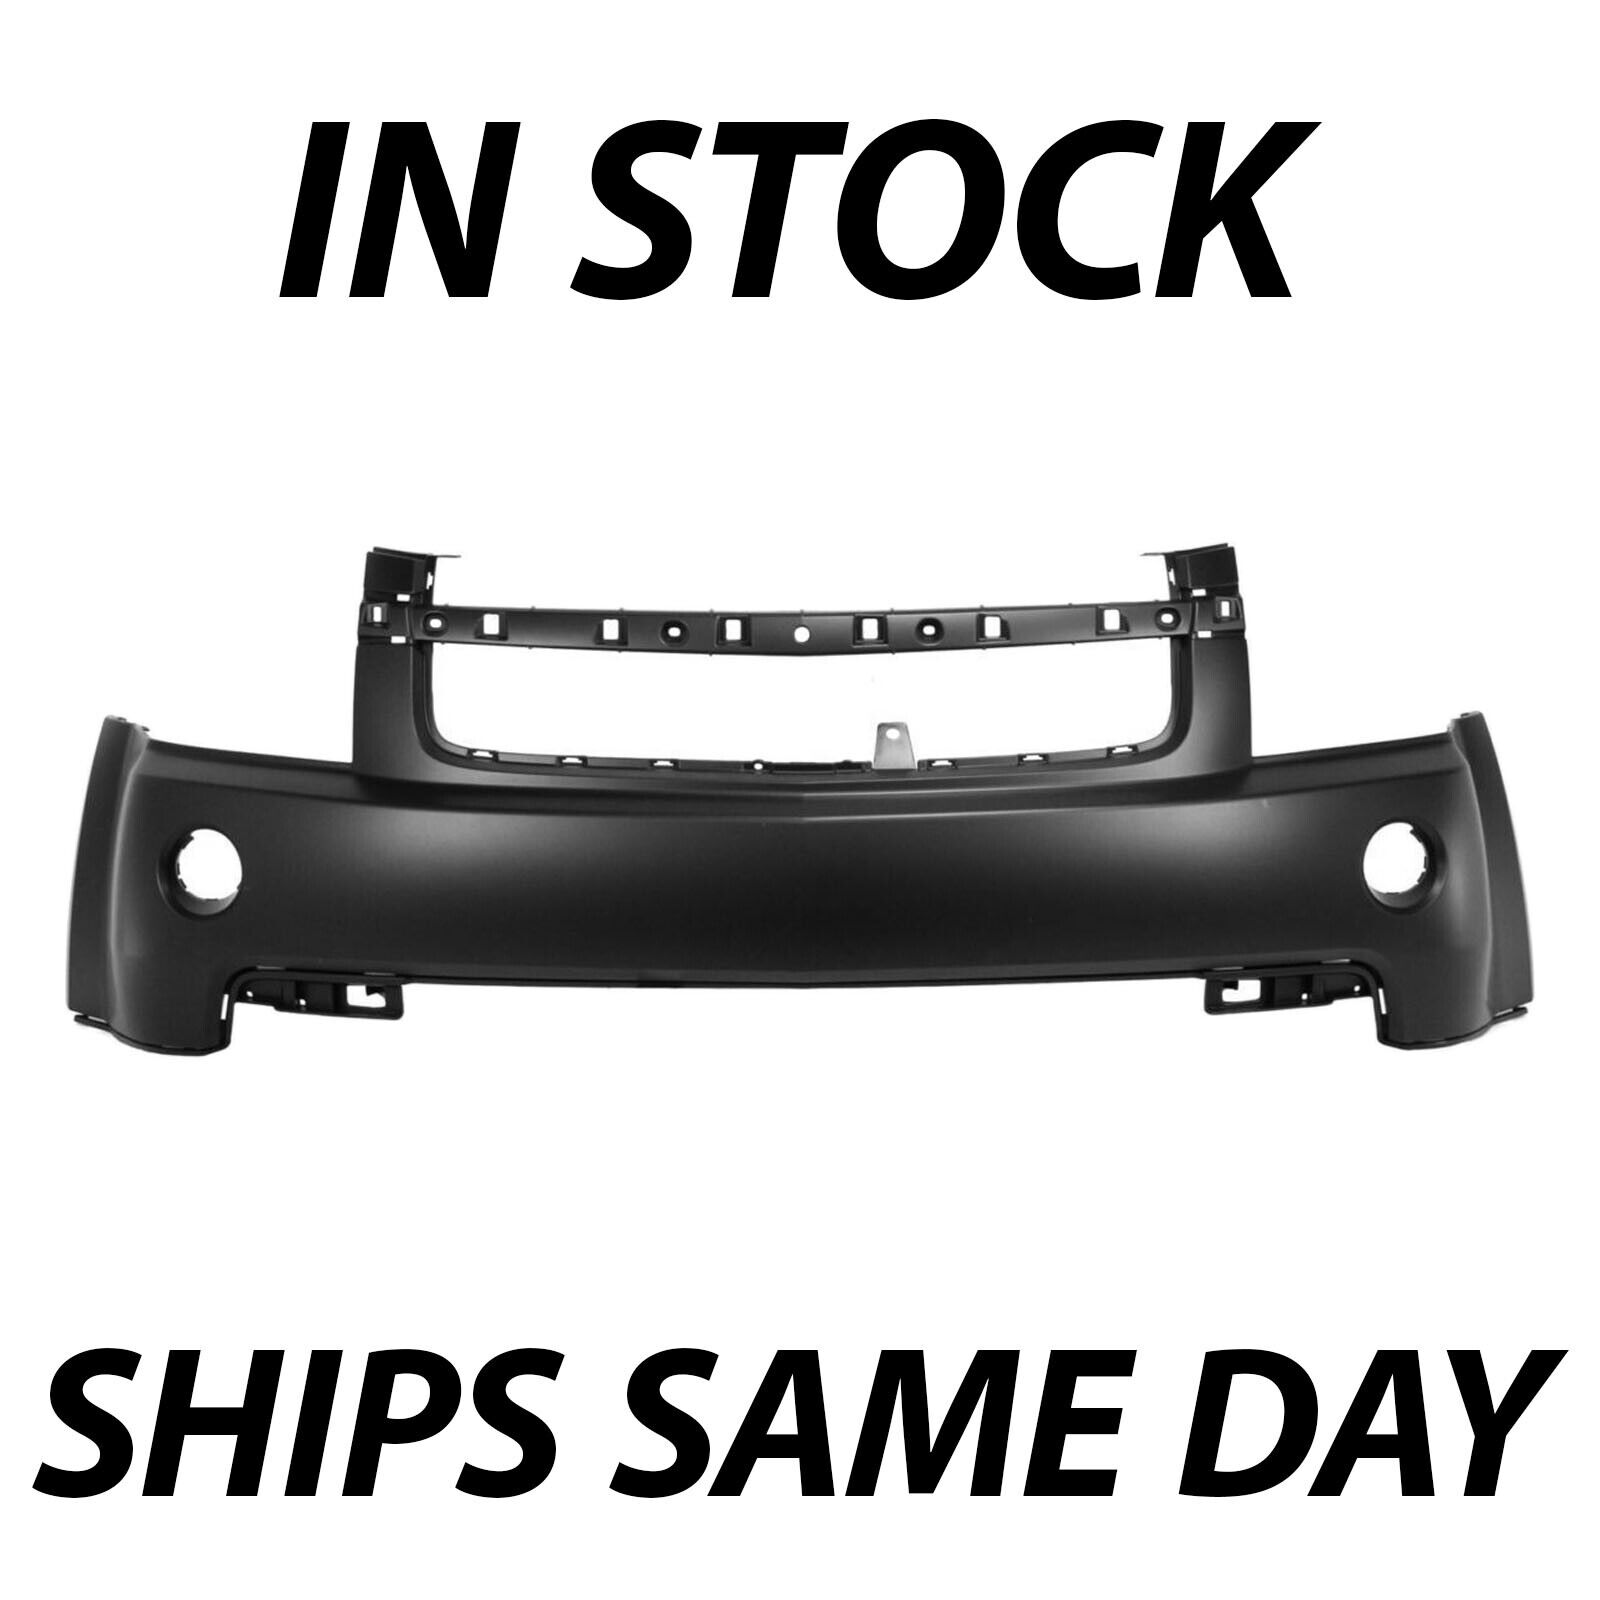 NEW Primered - Front Bumper Cover Replacement For 2007 2008 2009 Chevy Equinox